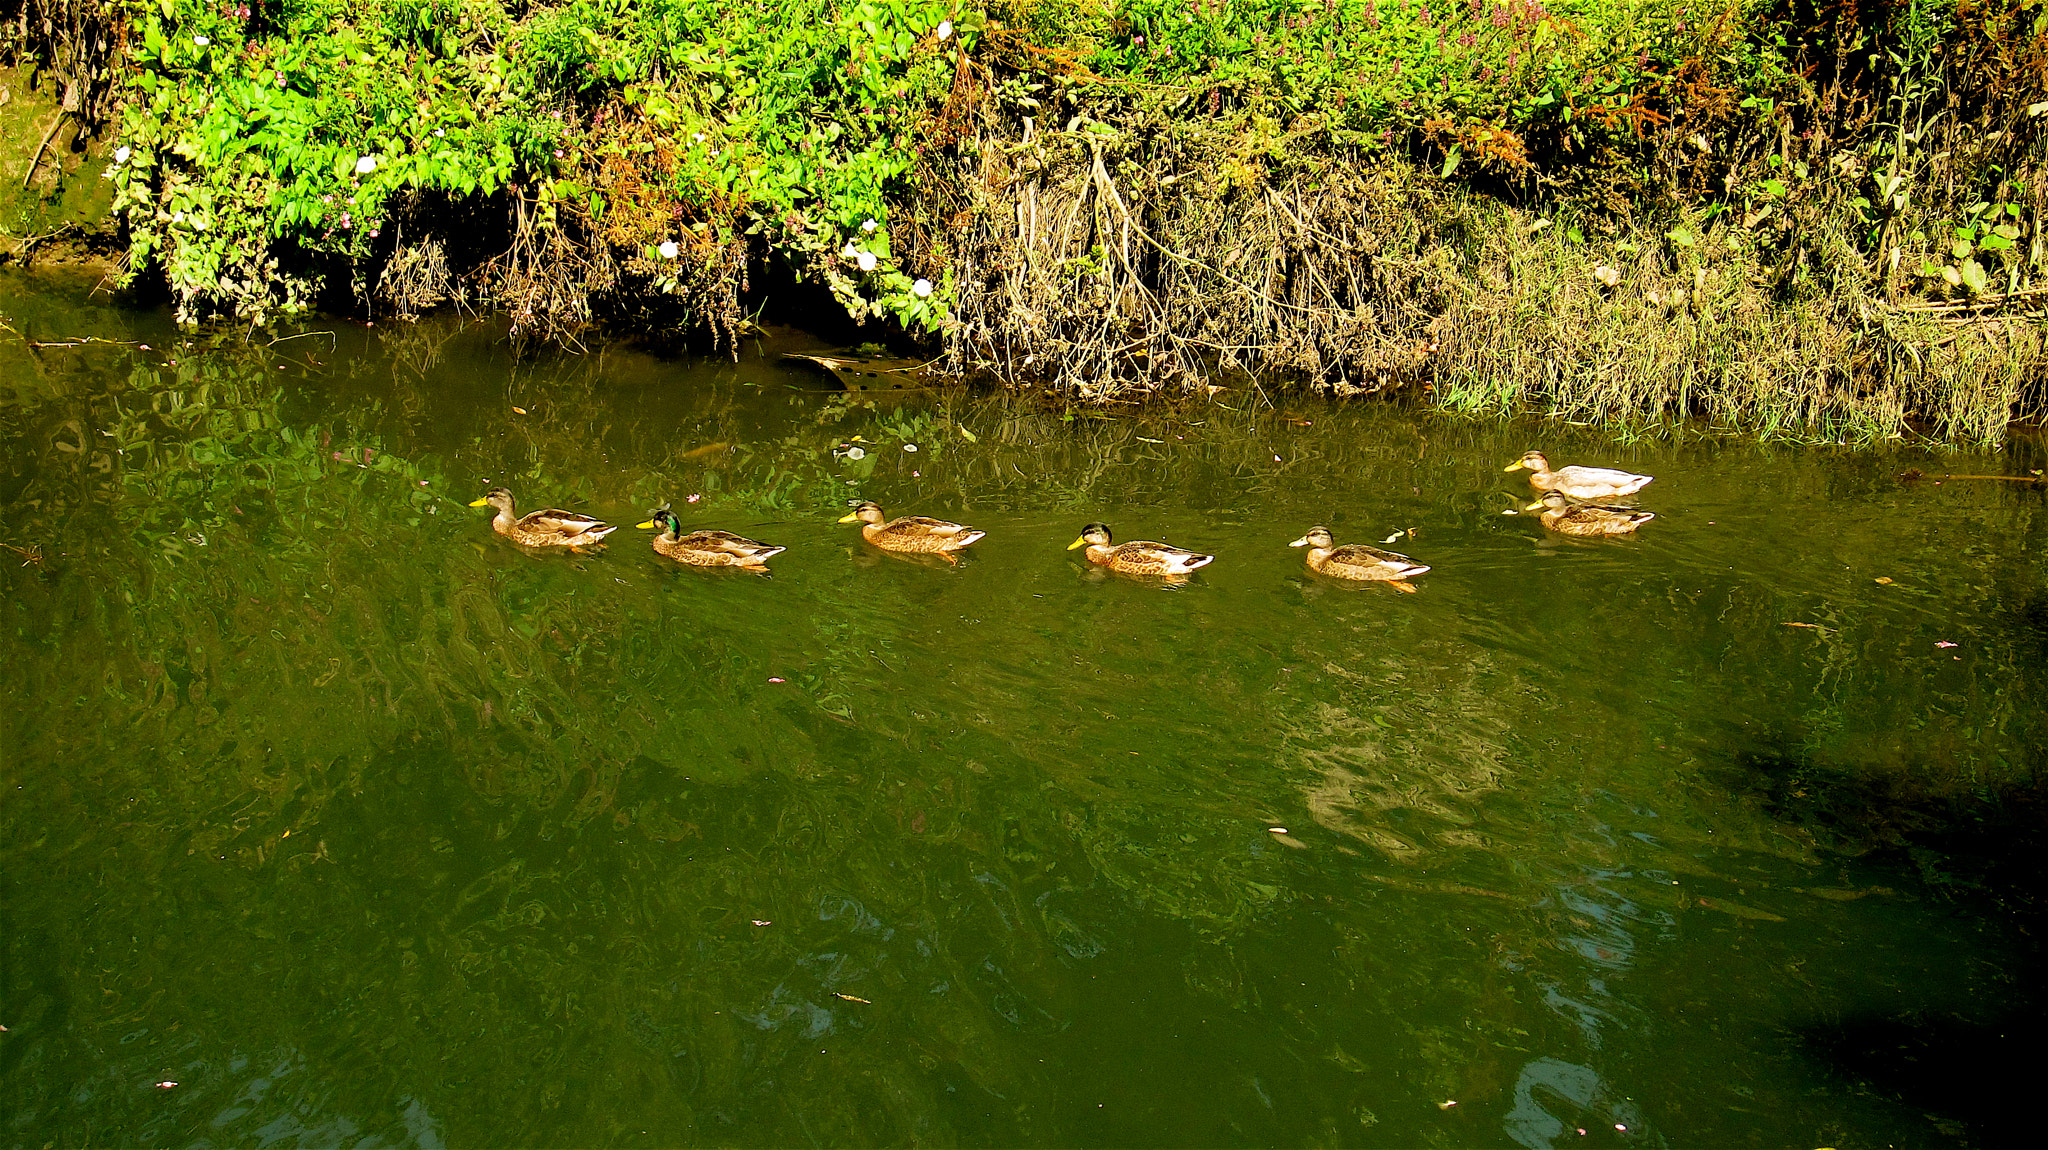 Canon PowerShot SD4000 IS (IXUS 300 HS / IXY 30S) sample photo. The little river had a family of ducks swimming do ... photography